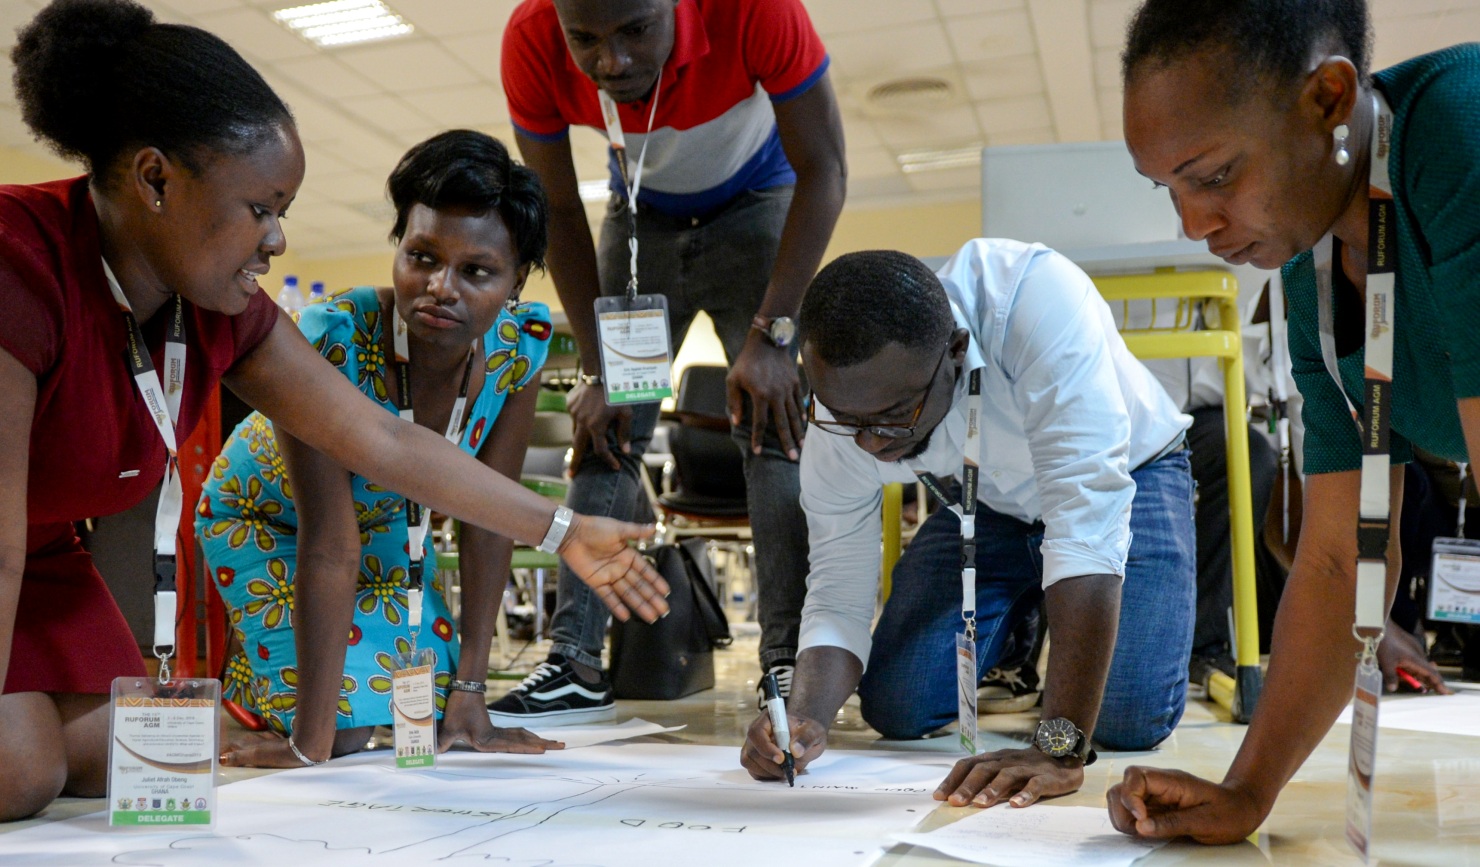 Delegates brainstorm during the 15th RUFORUM AGM held at the University of Cape Coast (UCC) in Ghana from 2-6 December, 2019. Photo credit: RUFORUM